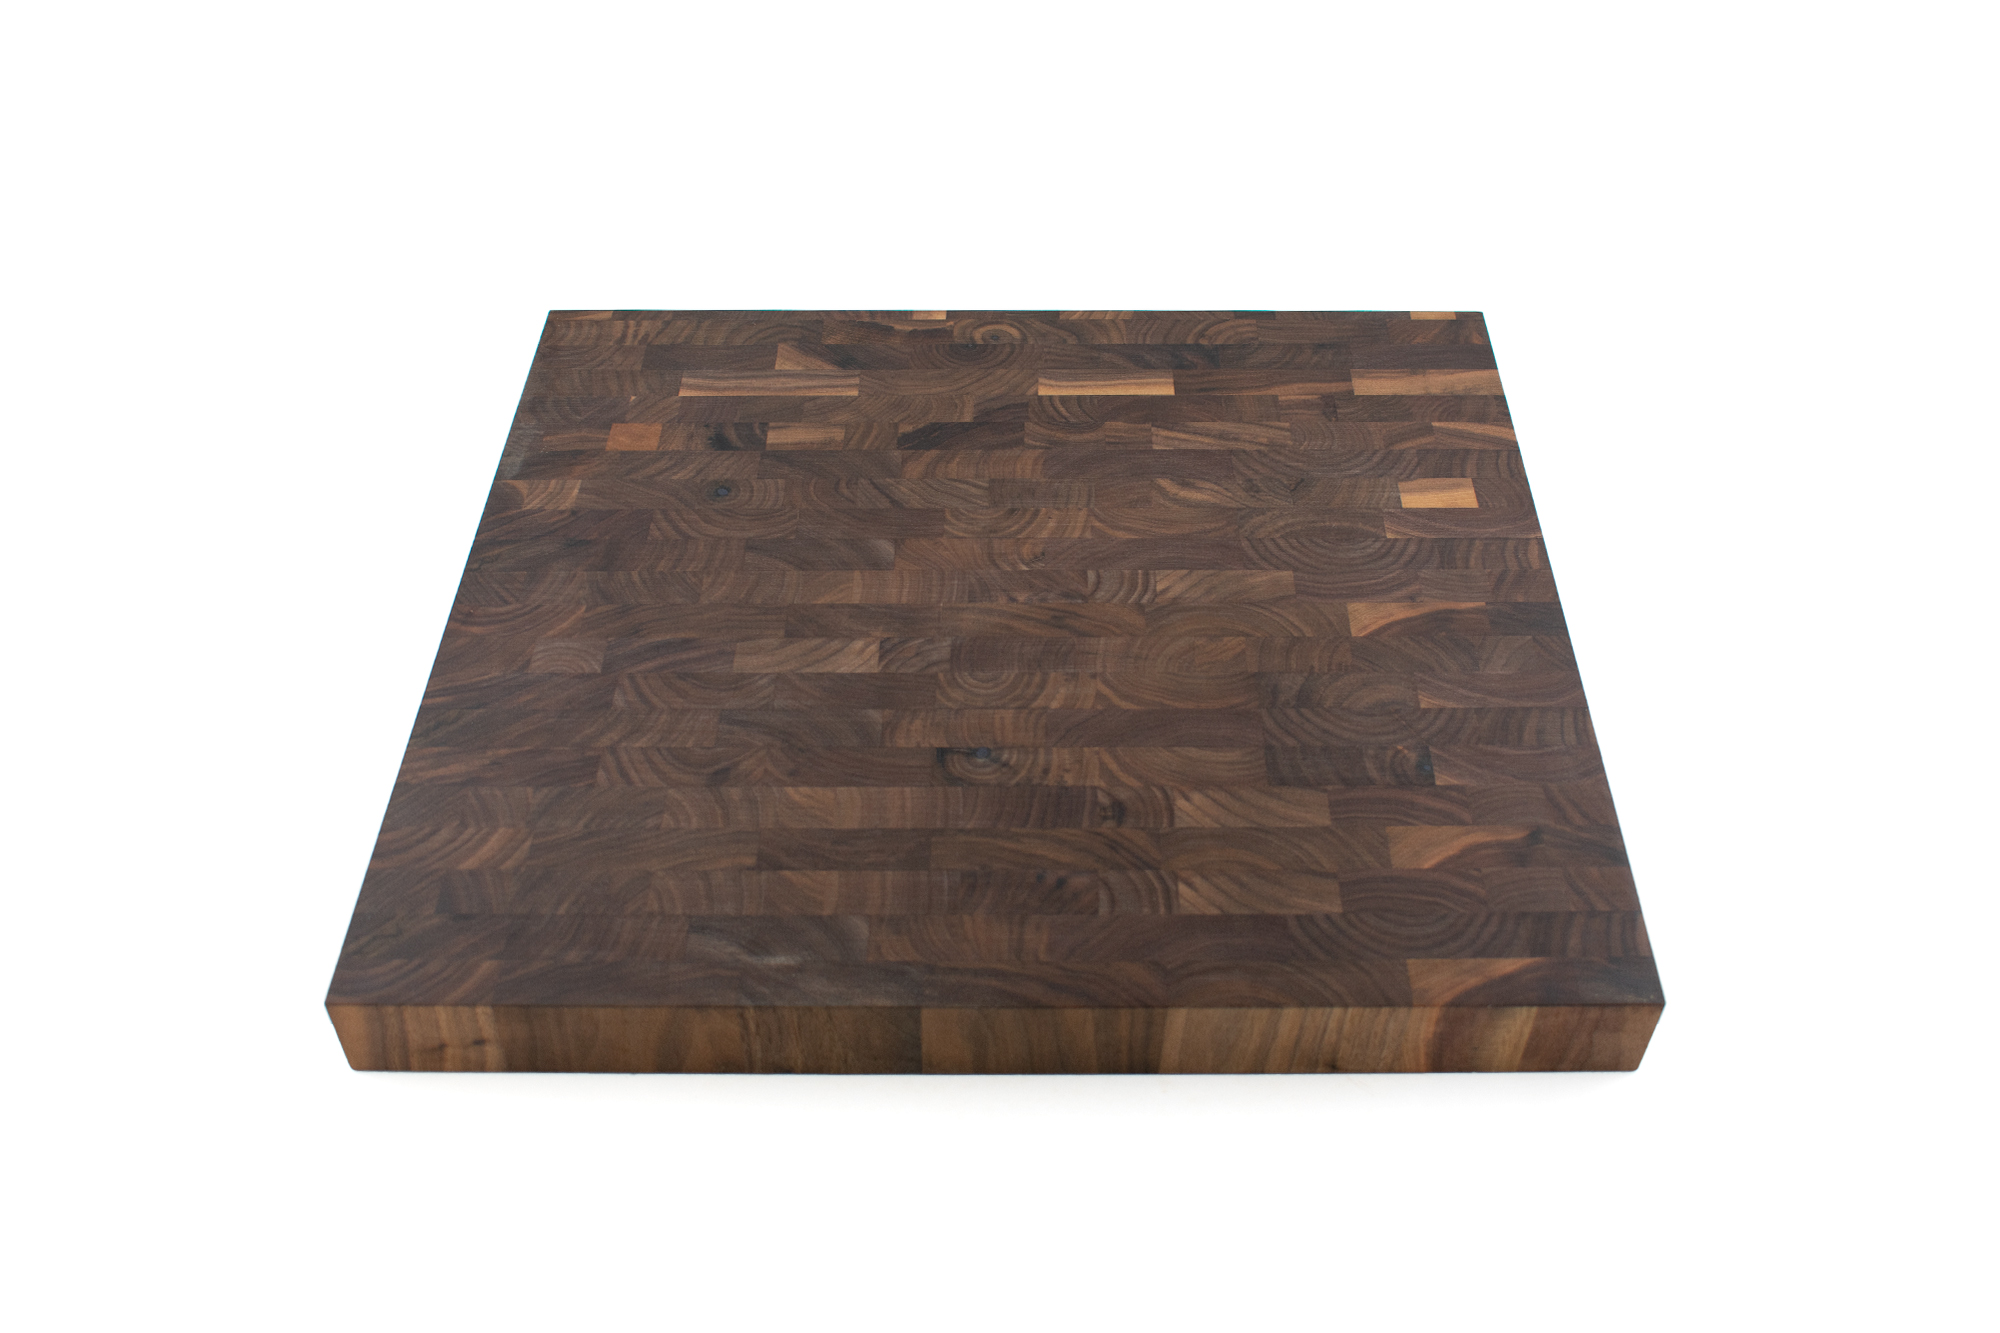 Walnut Large End grain butcher block with side handle indents 